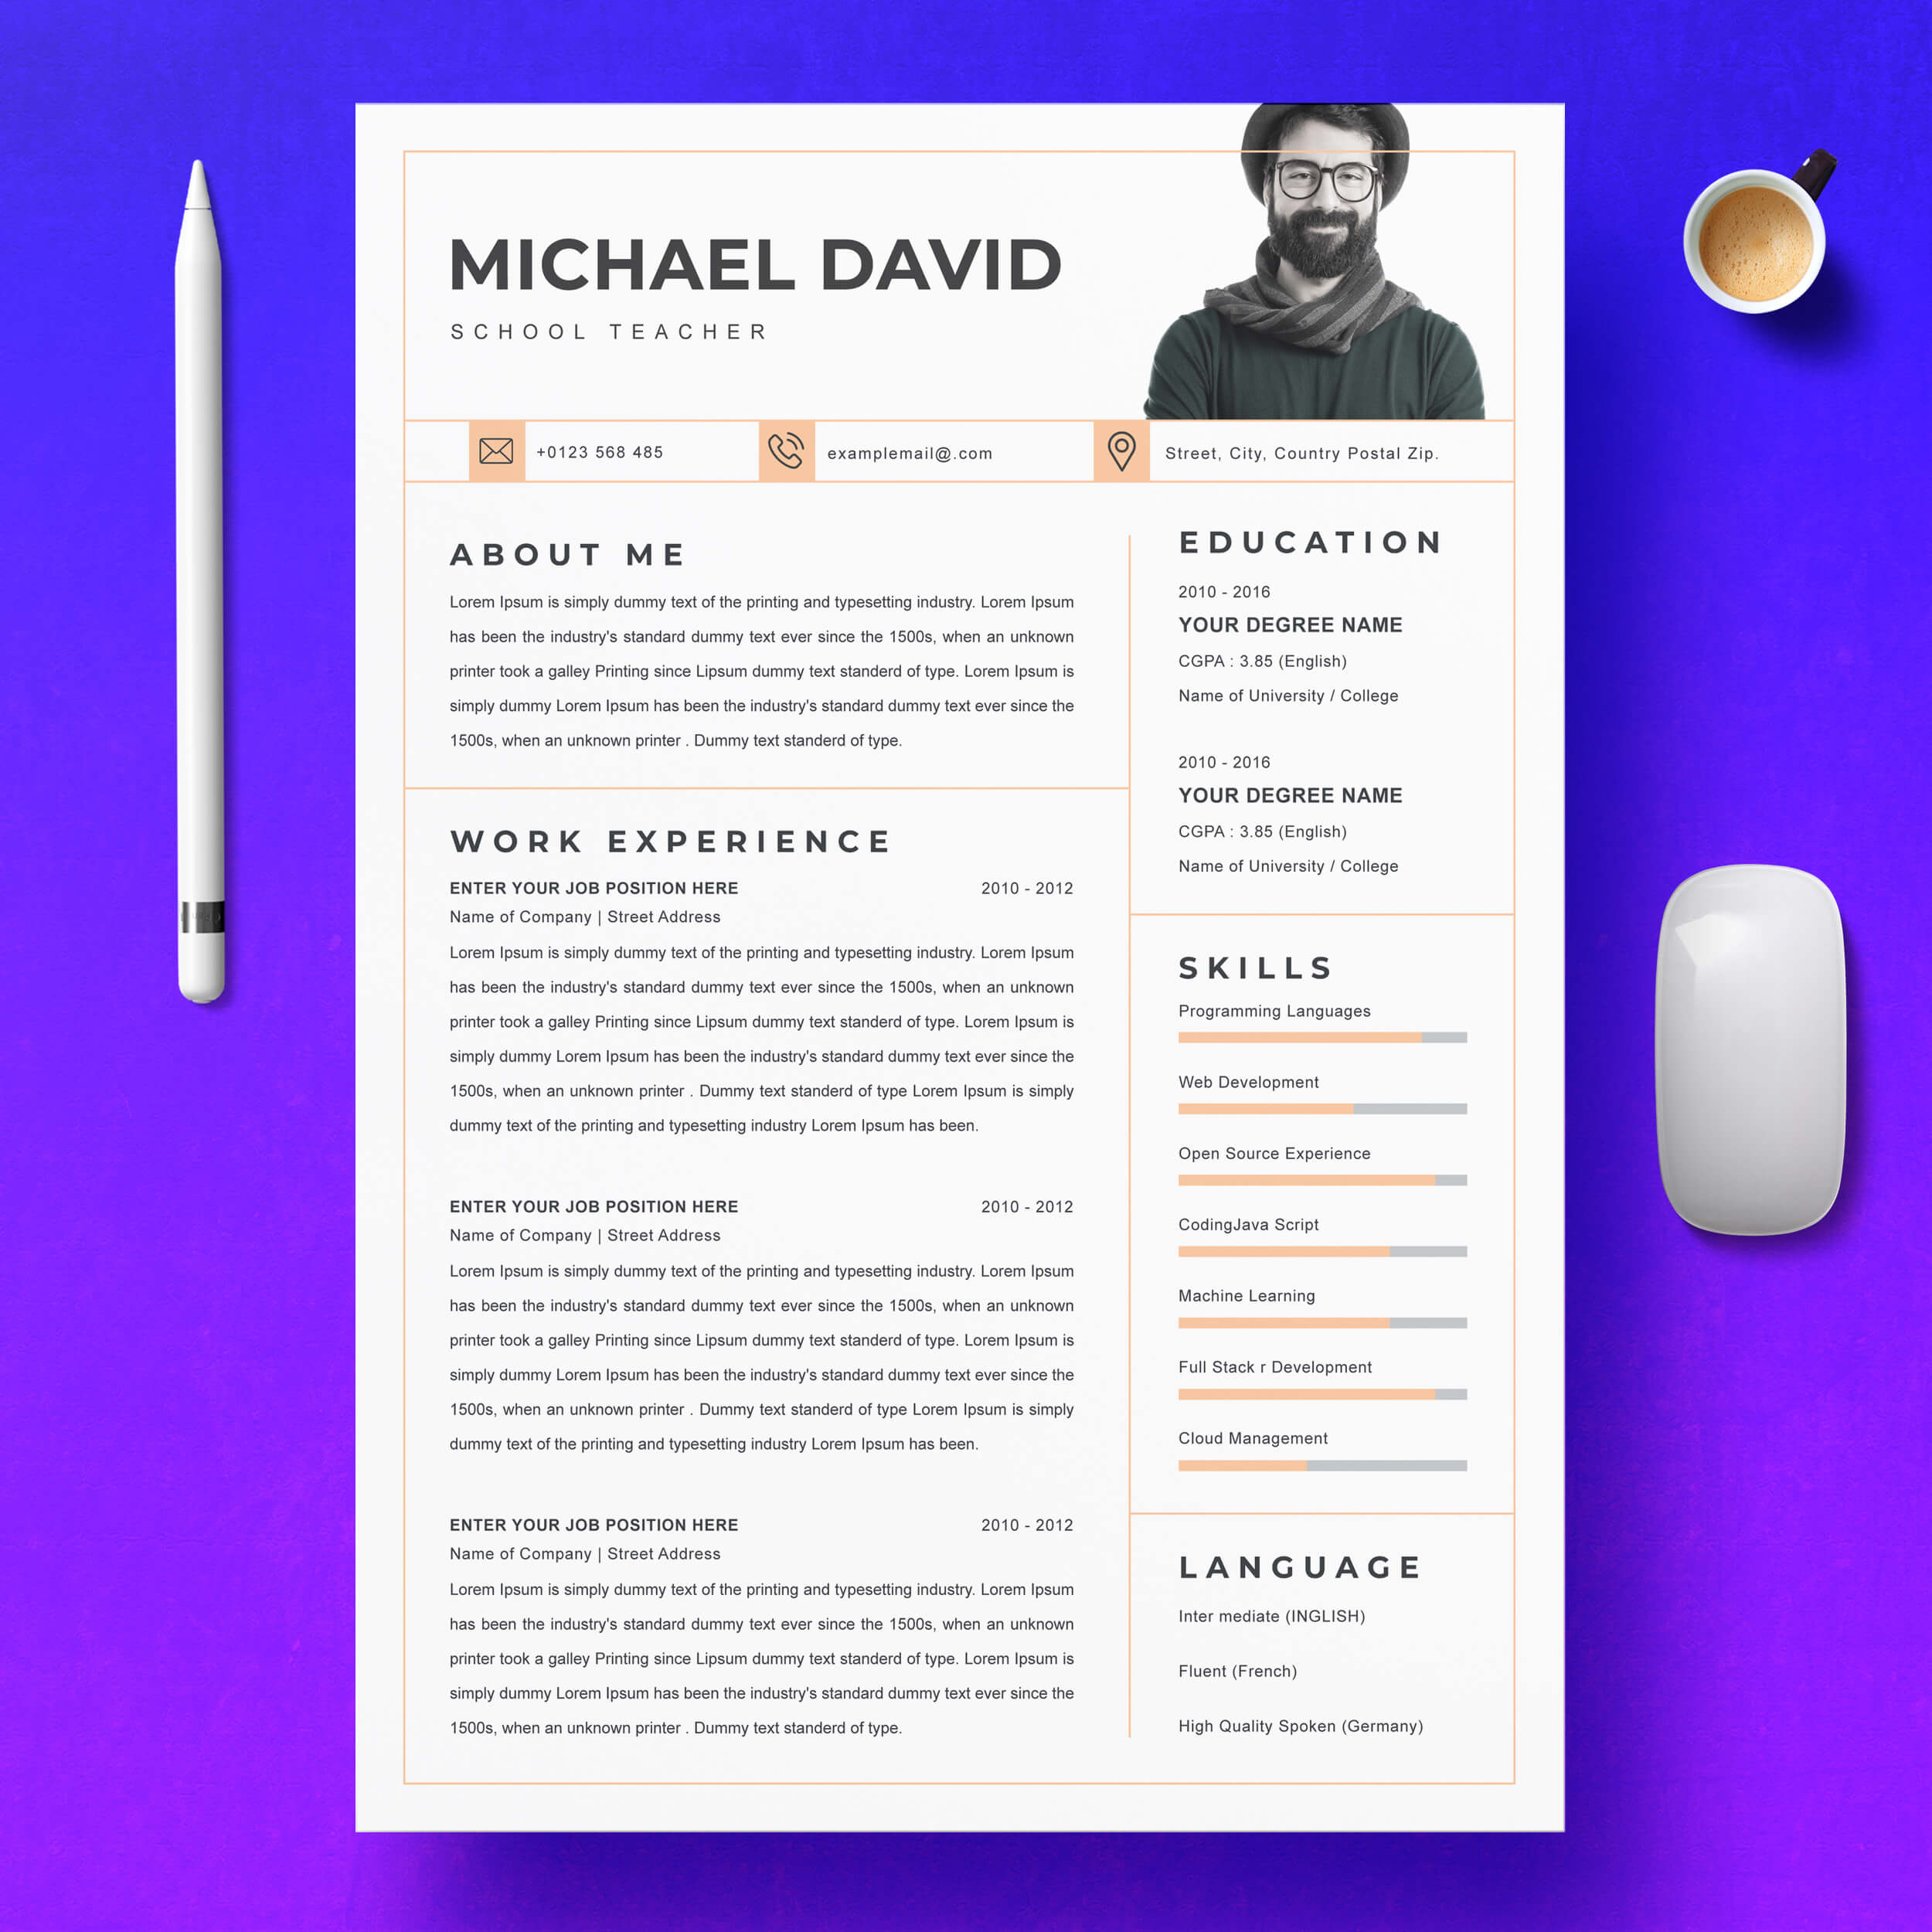 Clean and Elegant Resume Template for Creative Professionals in Design, Advertising, and Media Industries cover image.